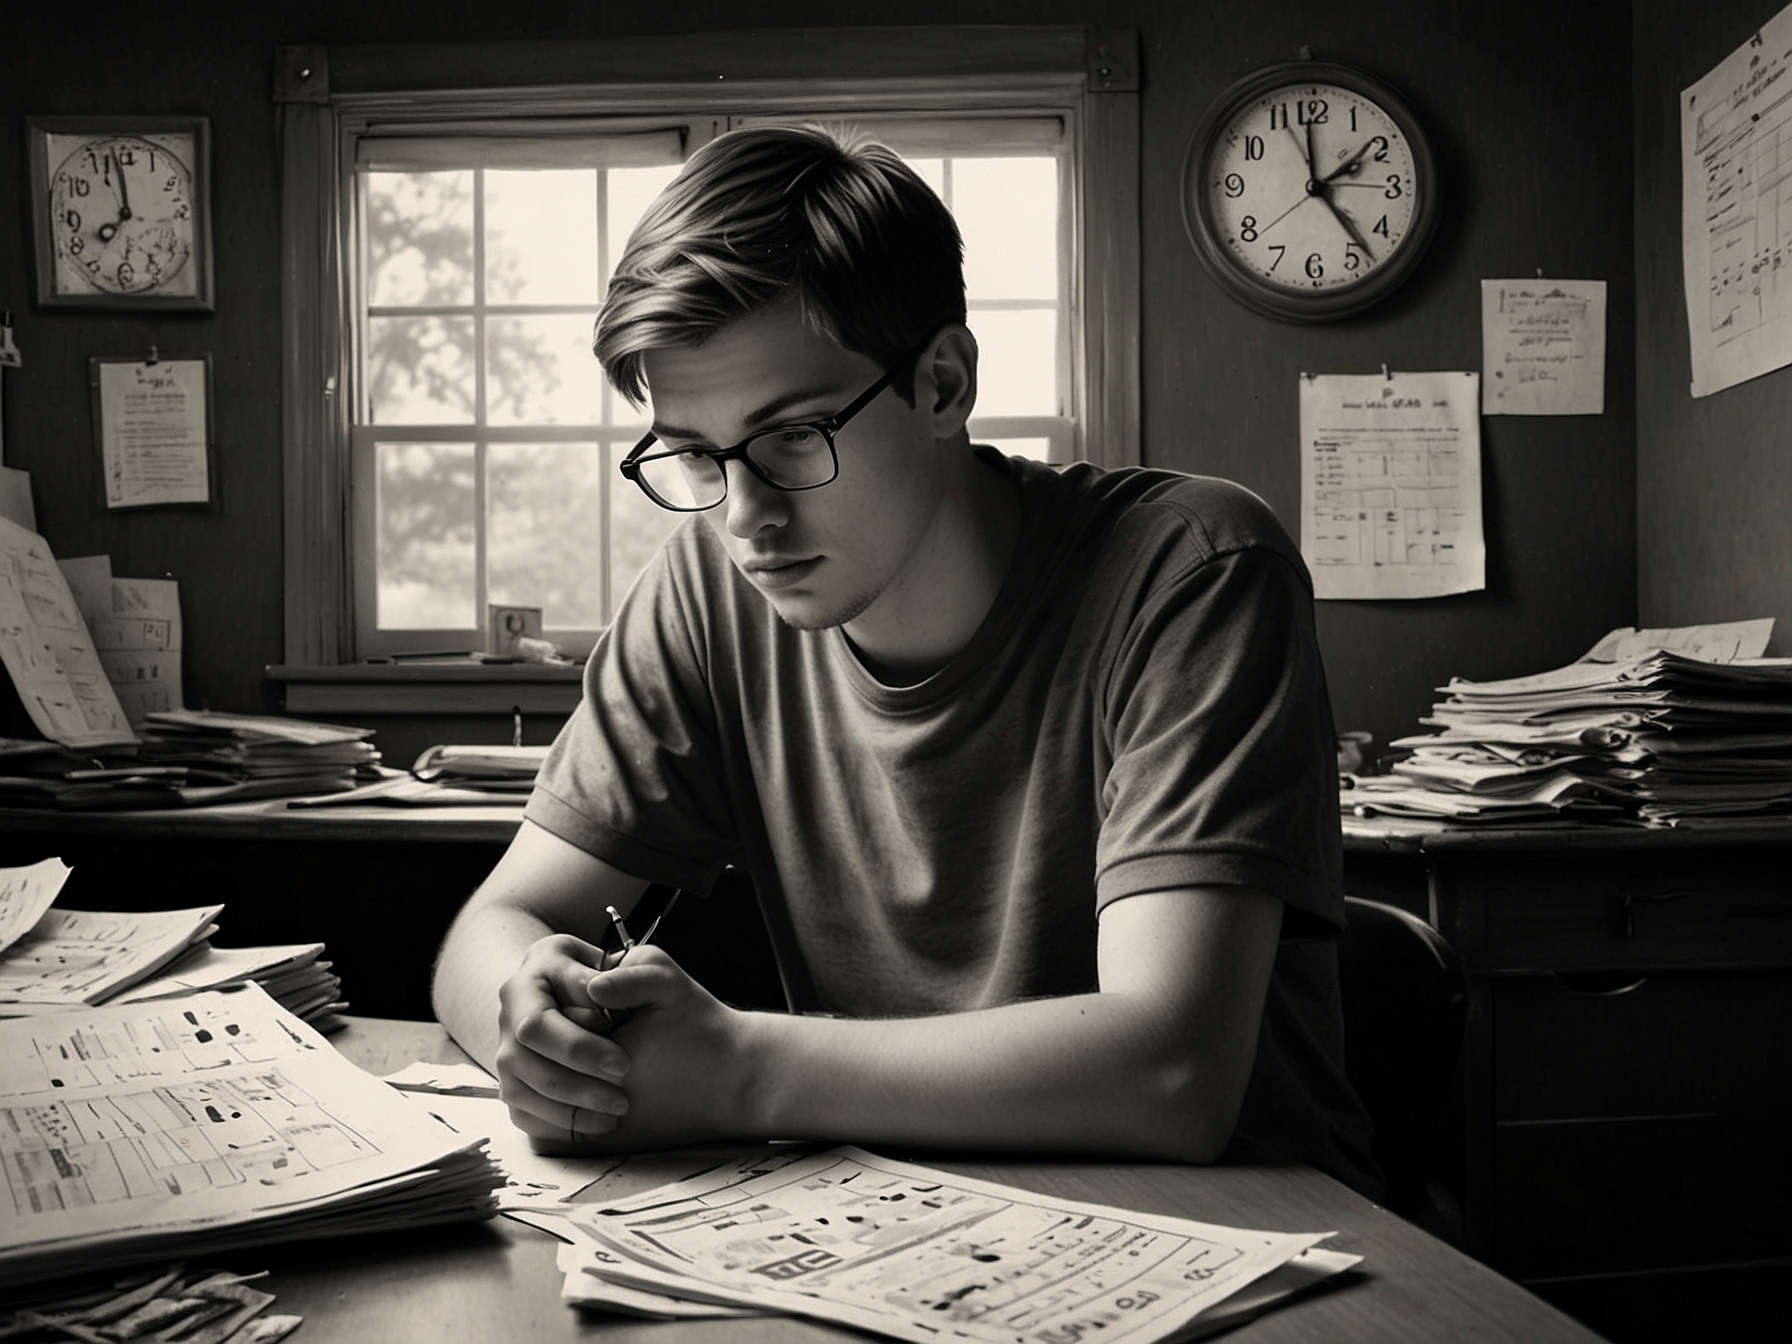 A frustrated young adult sitting at a cluttered desk with a voter registration form and a clock showing time running out, highlighting the looming deadline and apathy among youth.